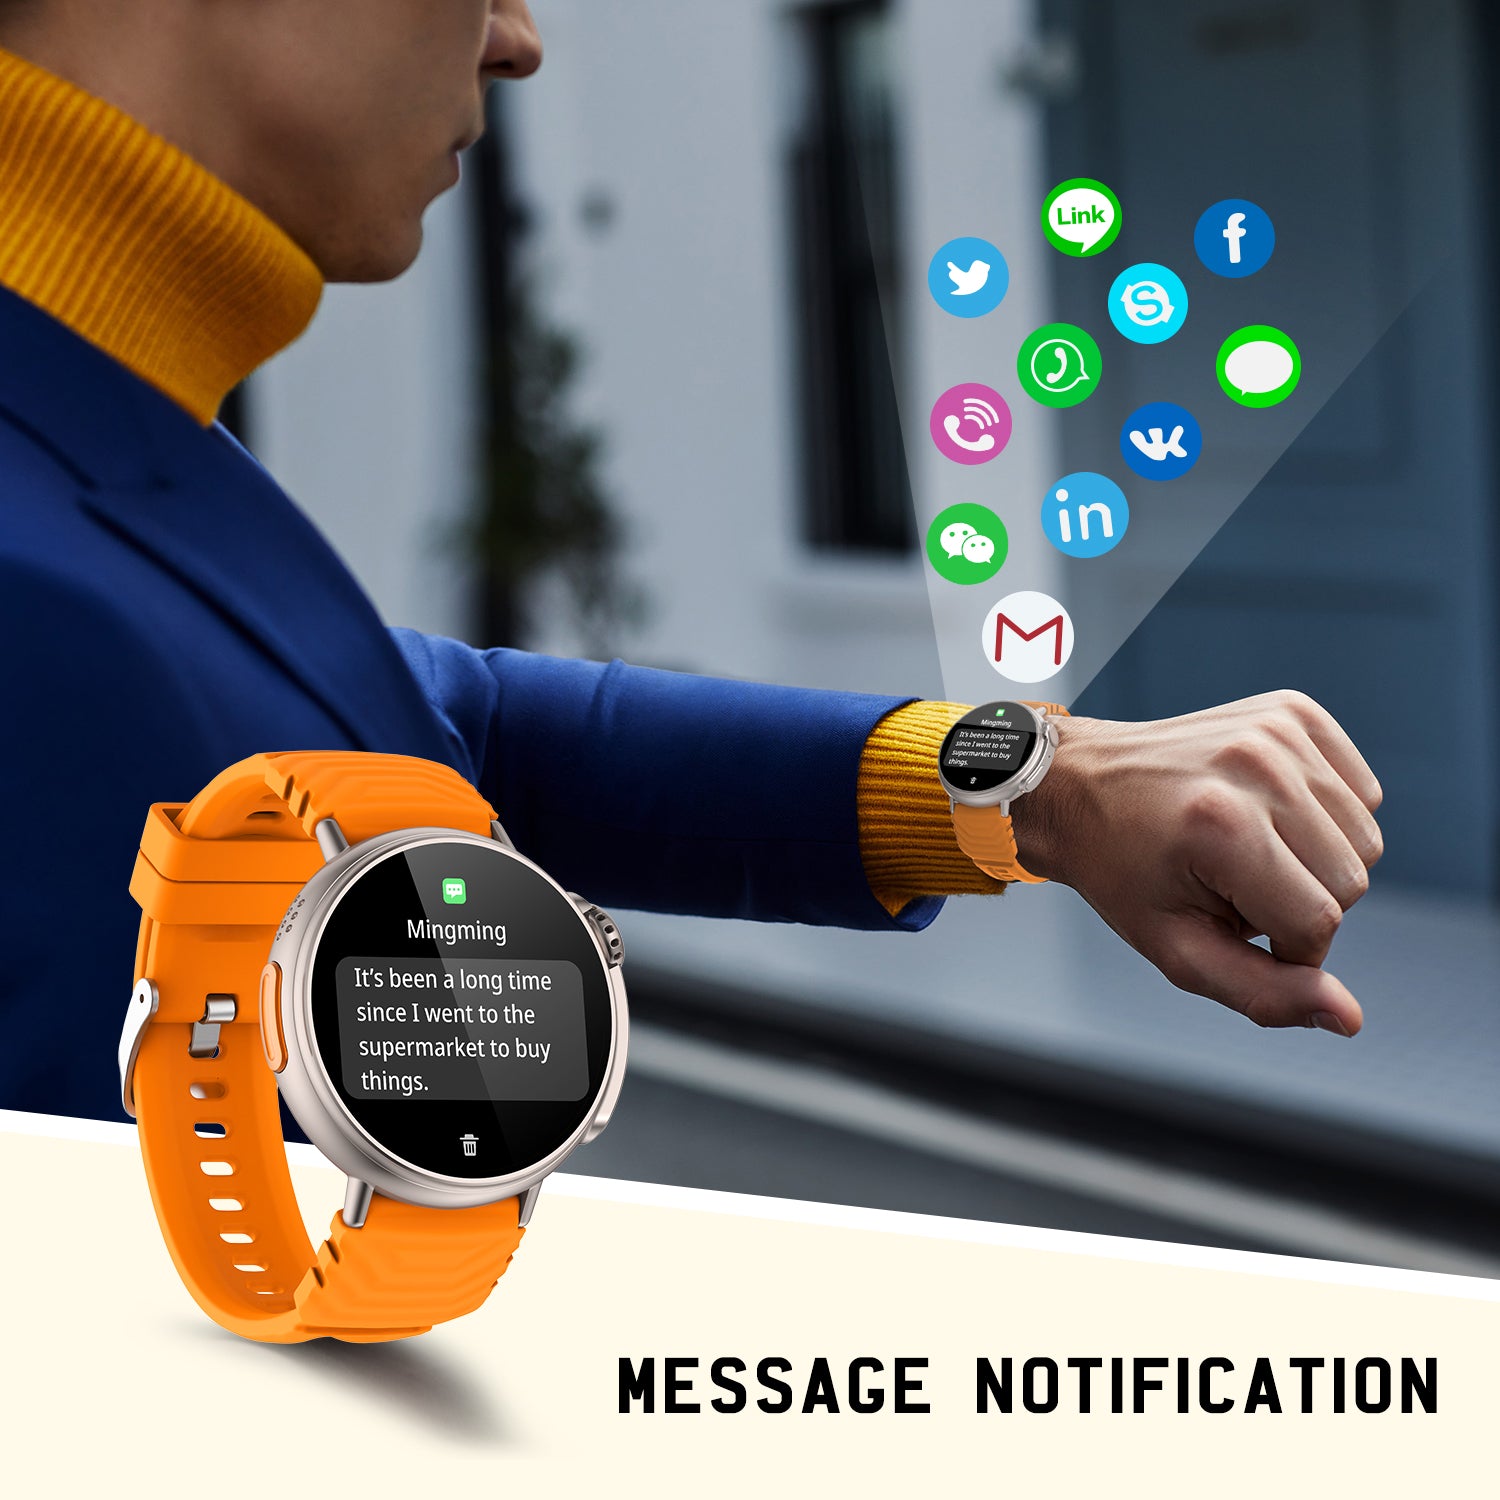 Smart Watch Ultra 1.52" Round HD AMOLED Display with call 120+ SPORT MODES